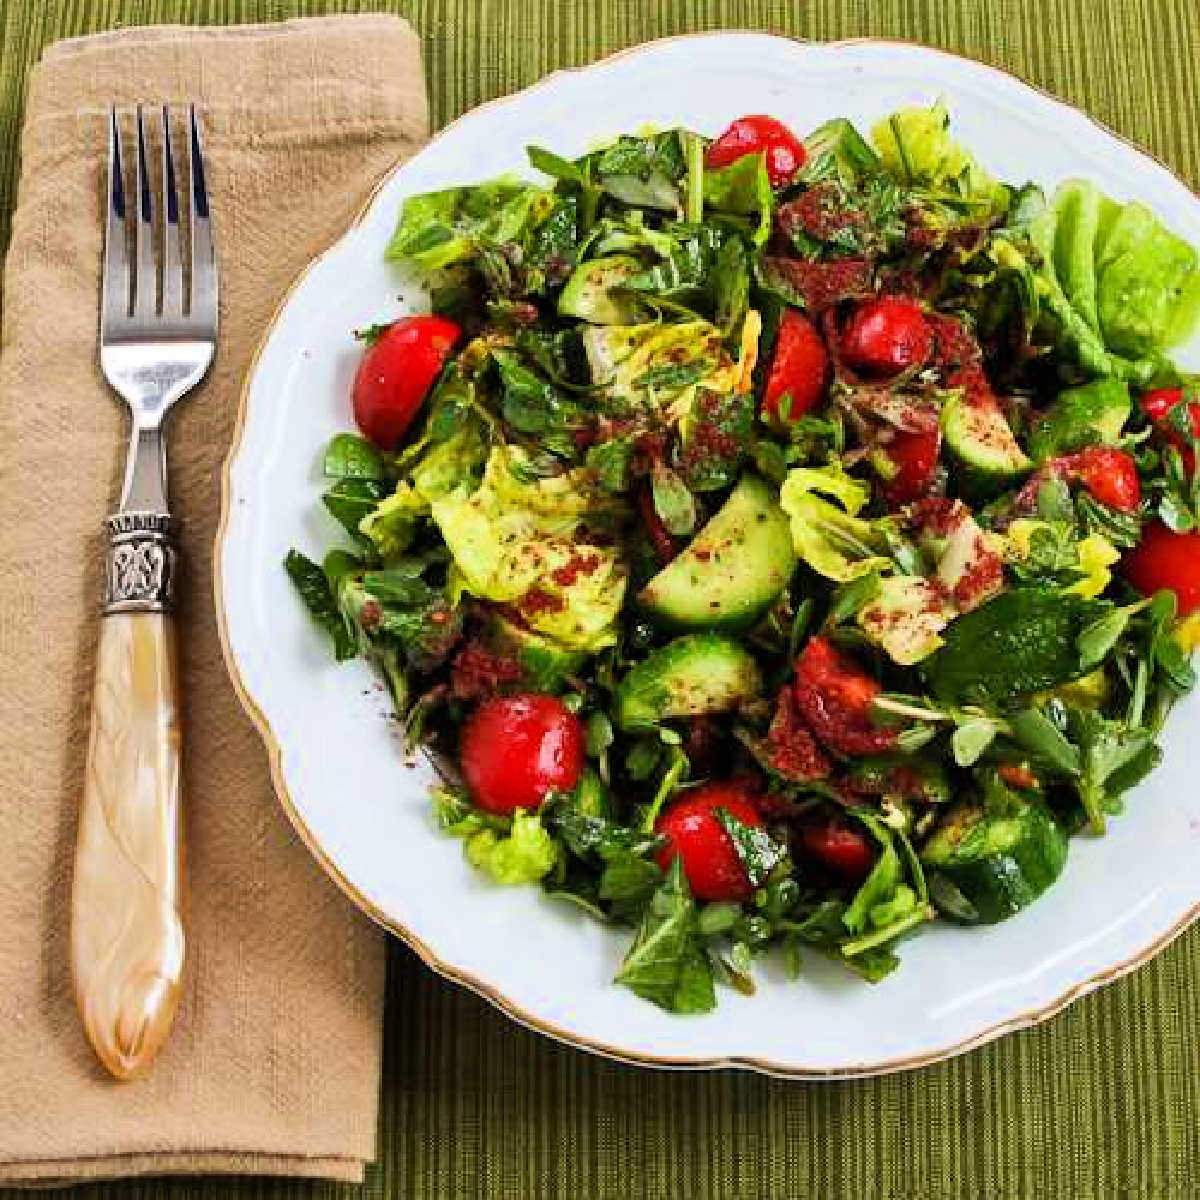 Purslane Salad with Lettuce, Tomatoes, Cucumbers, and Mint shown on salad plate with fork and napkin.